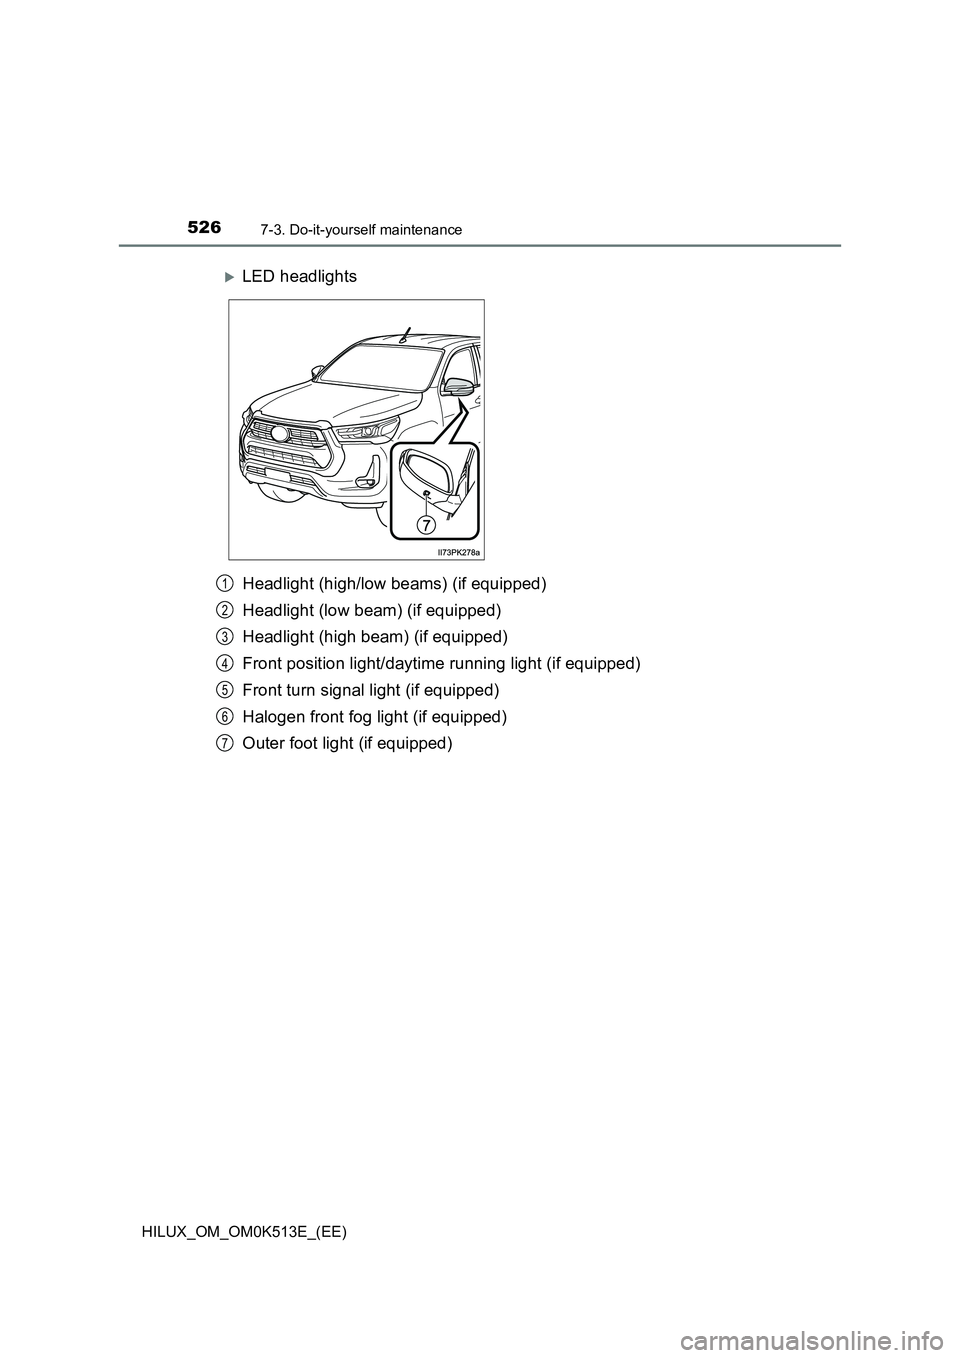 TOYOTA HILUX 2021  Owners Manual (in English) 5267-3. Do-it-yourself maintenance
HILUX_OM_OM0K513E_(EE)
Headlight (high/low beams) (if equipped) 
Headlight (low beam) (if equipped) 
Headlight (high beam) (if equipped) 
Front position light/daytim